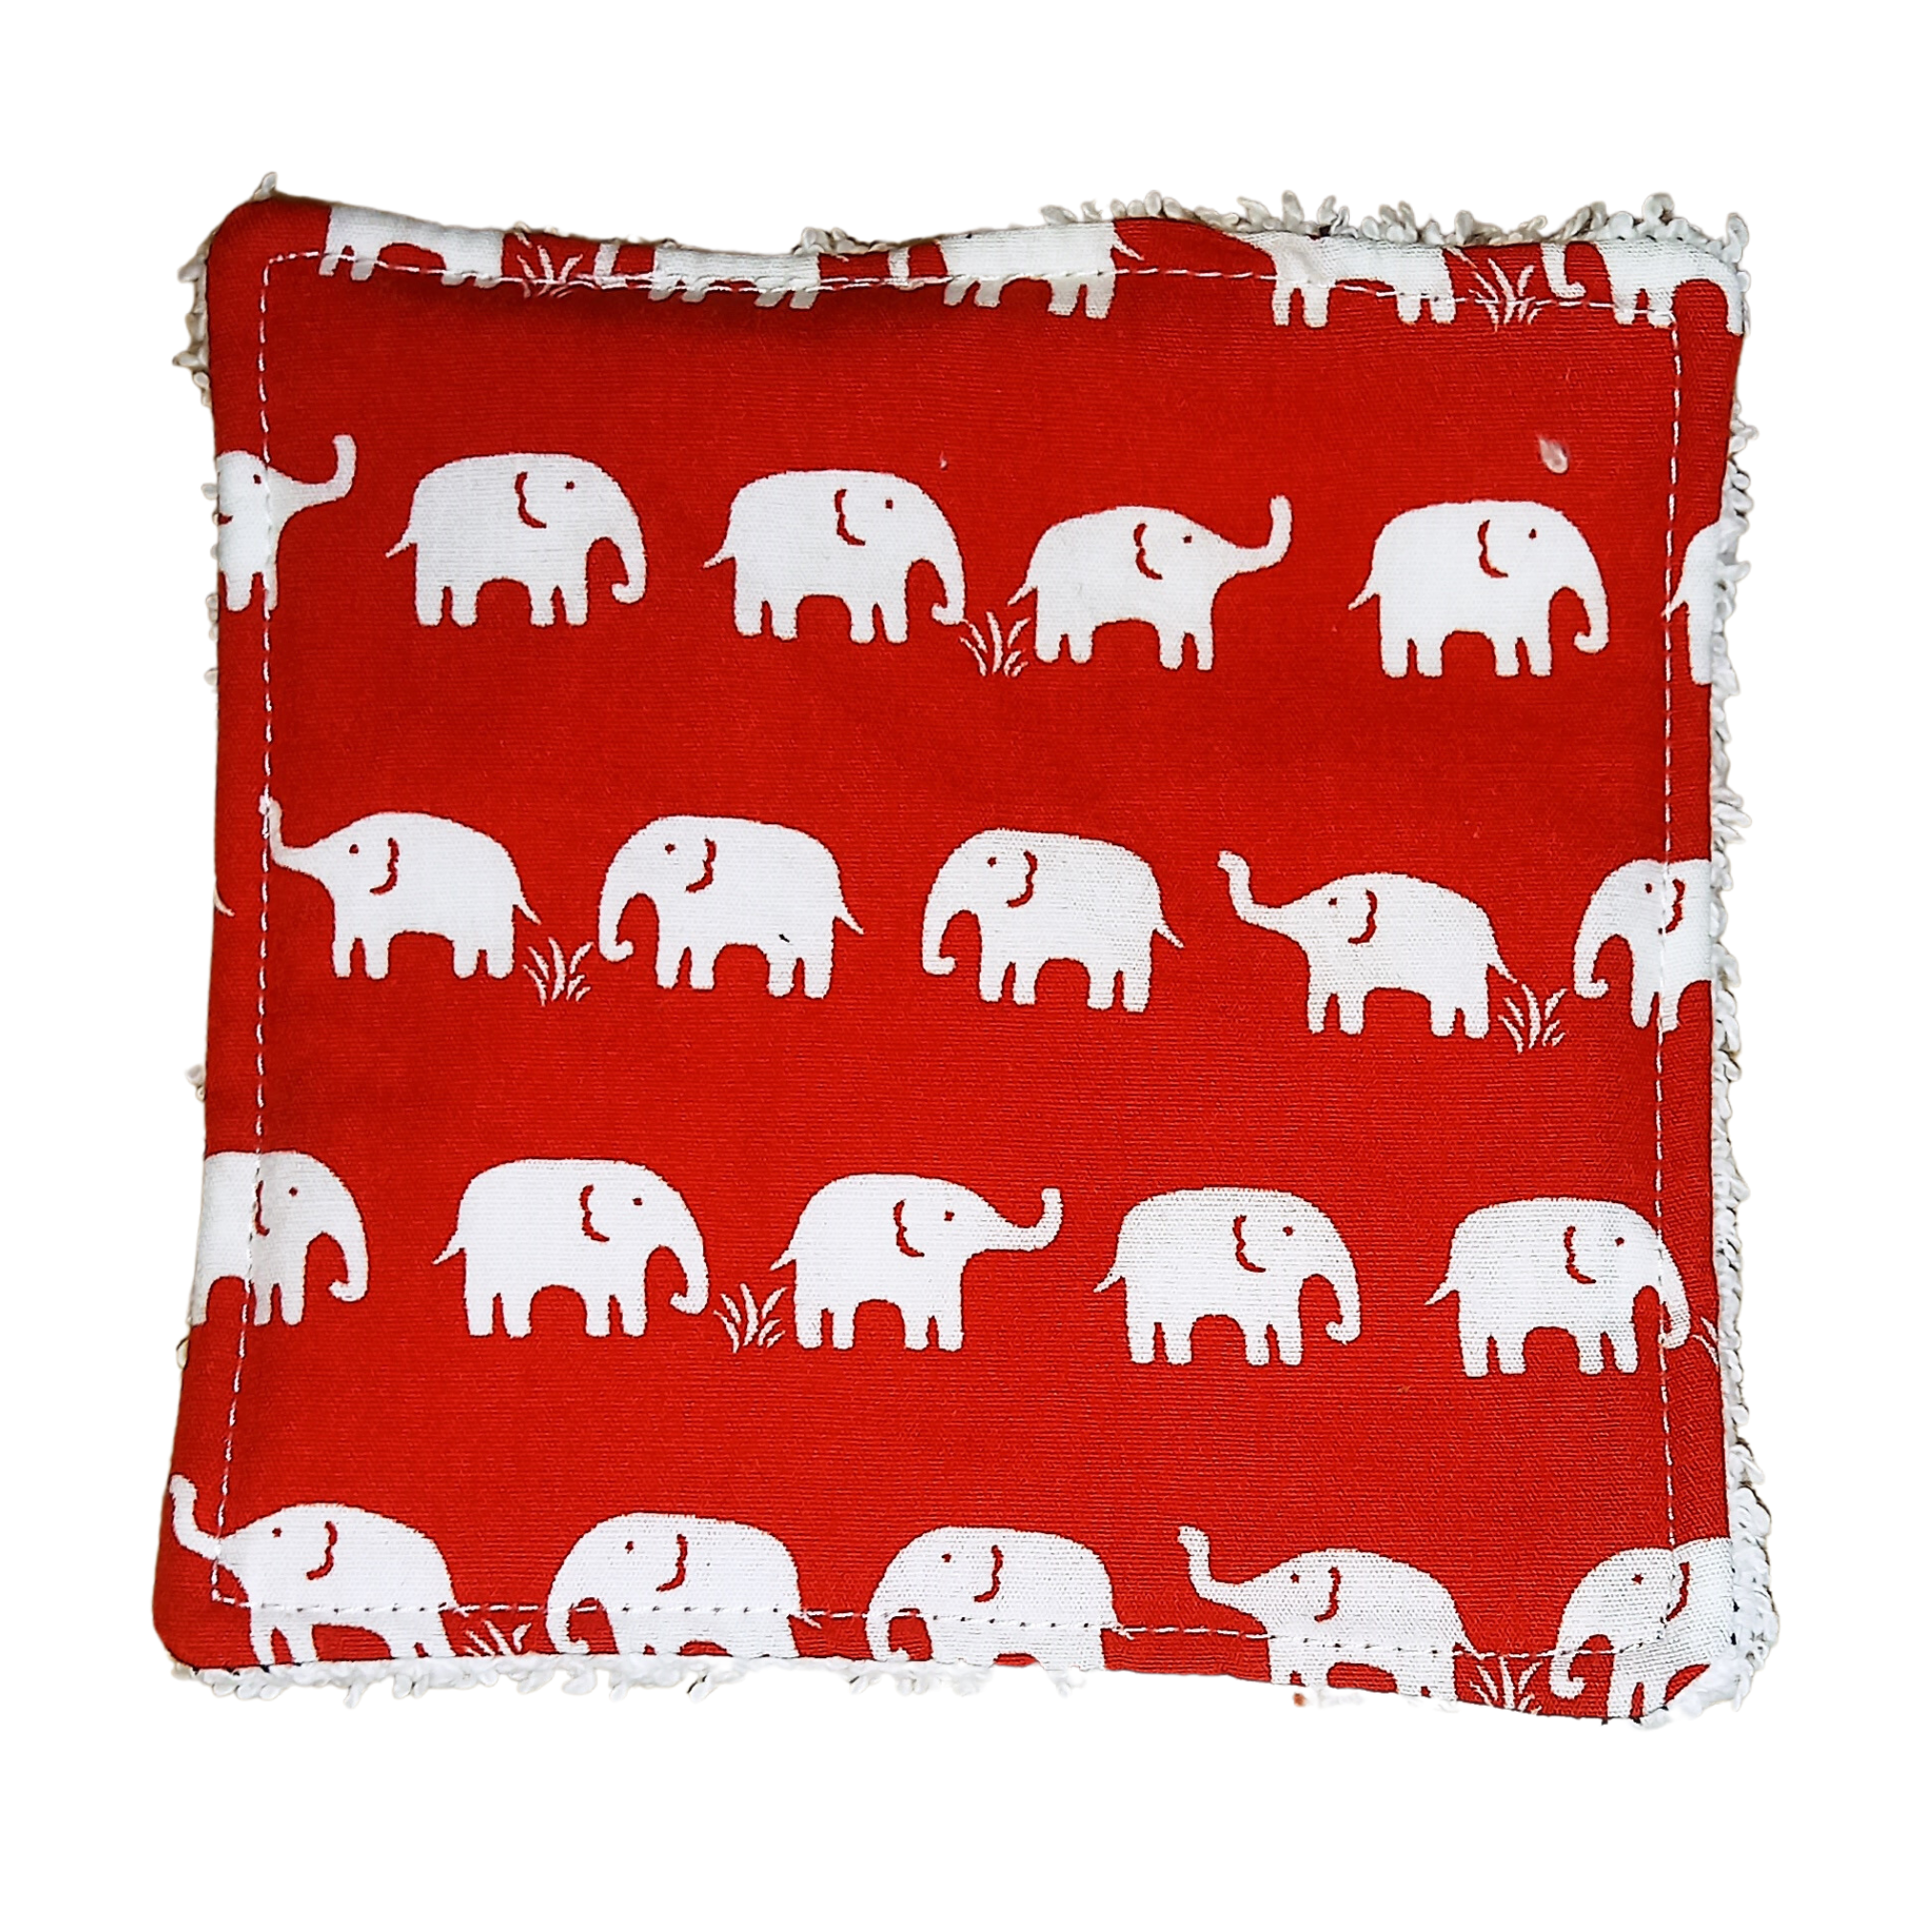 Reusable Cotton Wipes 4 Pack - Make Up - Toddler - Finger Wipes - Red Elephants with White Towelling